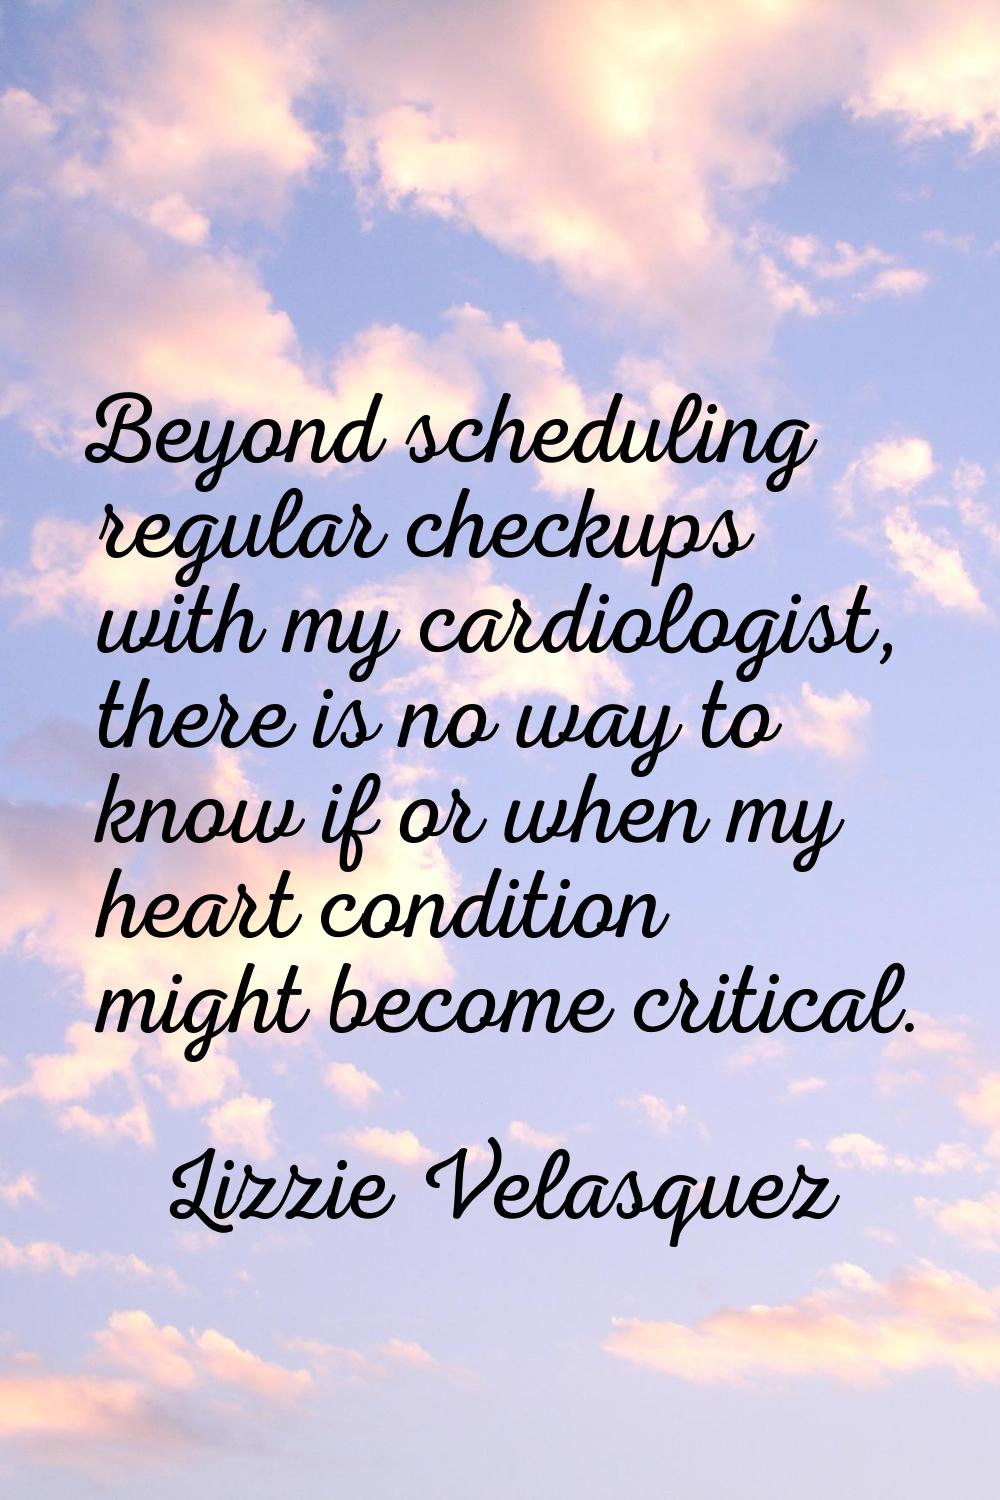 Beyond scheduling regular checkups with my cardiologist, there is no way to know if or when my hear